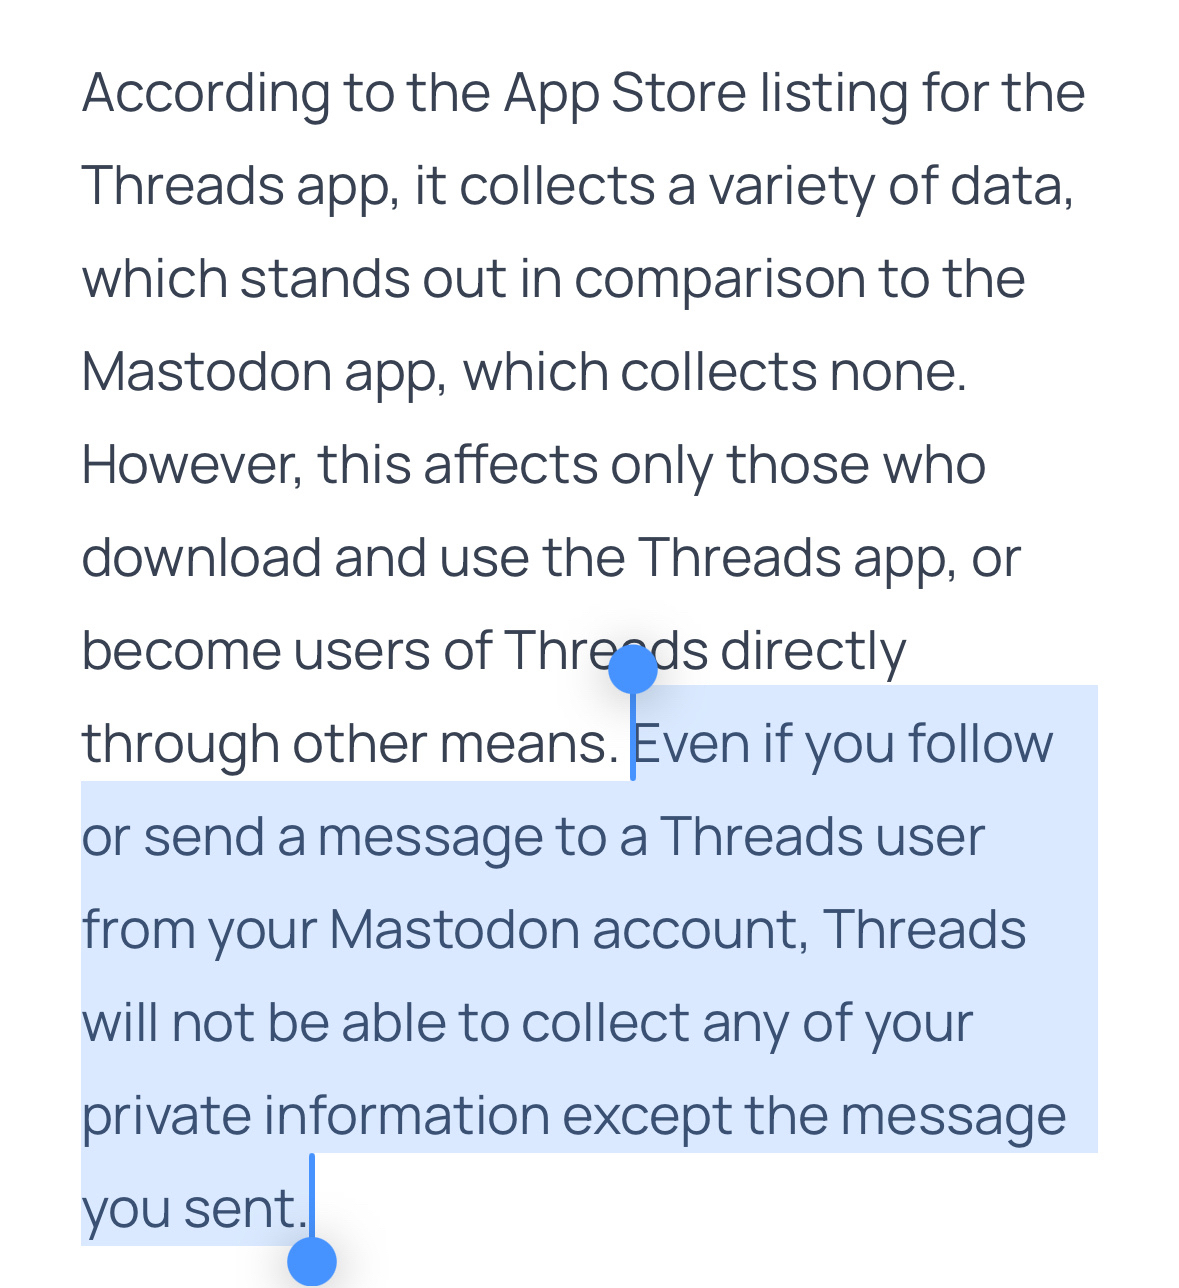 According to the App Store listing for the Threads app, it collects a variety of data, which stands out in comparison to the Mastodon app, which collects none.&10;However, this affects only those who download and use the Threads app, or become users of Threads directly through other means. Even if you follow or send a message to a Threads user from your Mastodon account, Threads will not be able to collect any of your private information except the message you sent.